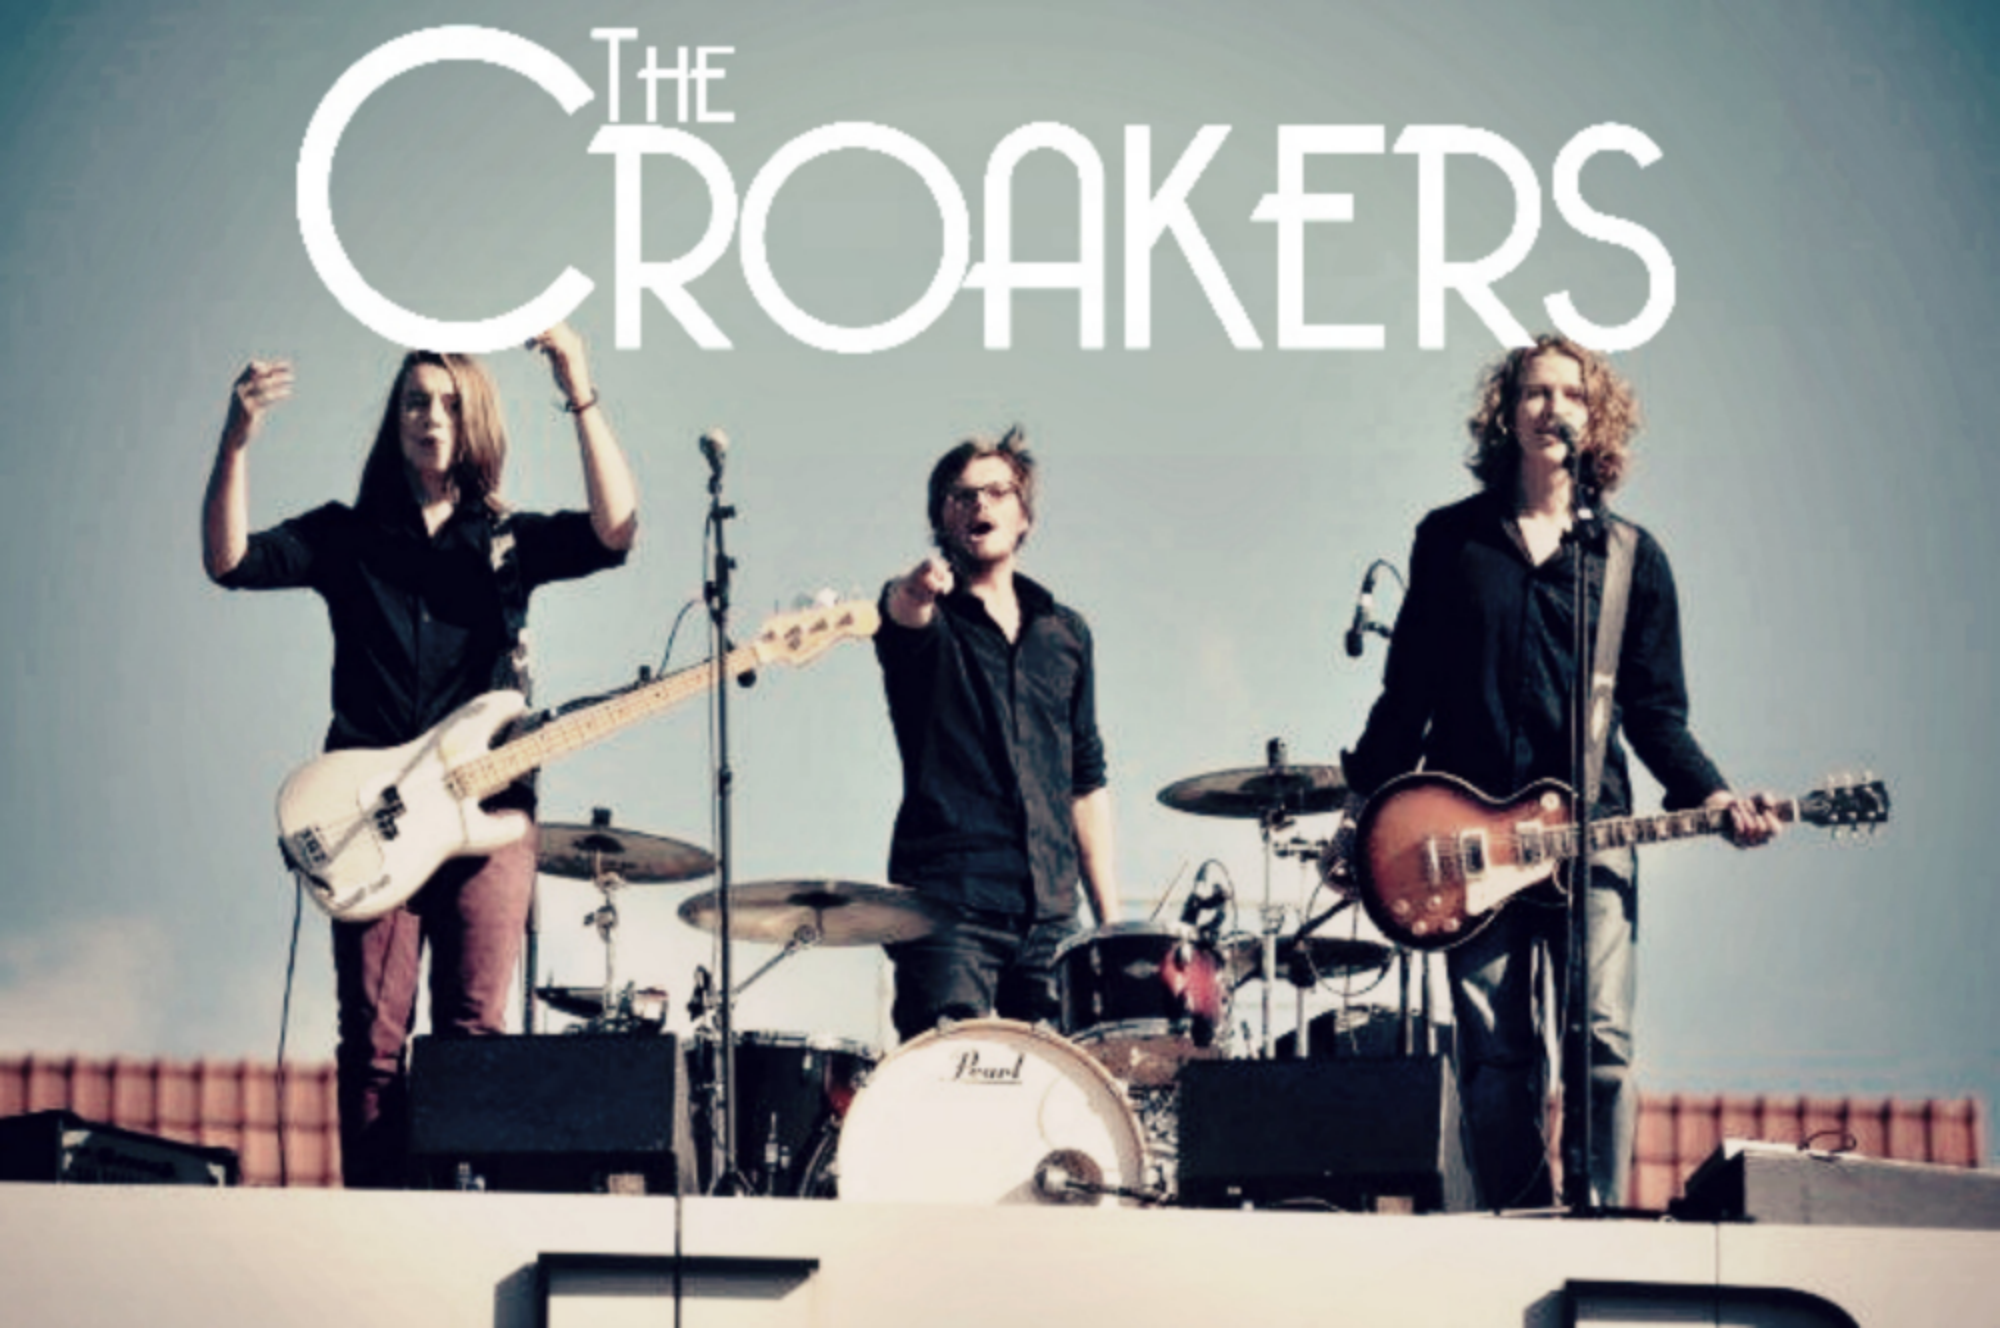 The Croakers